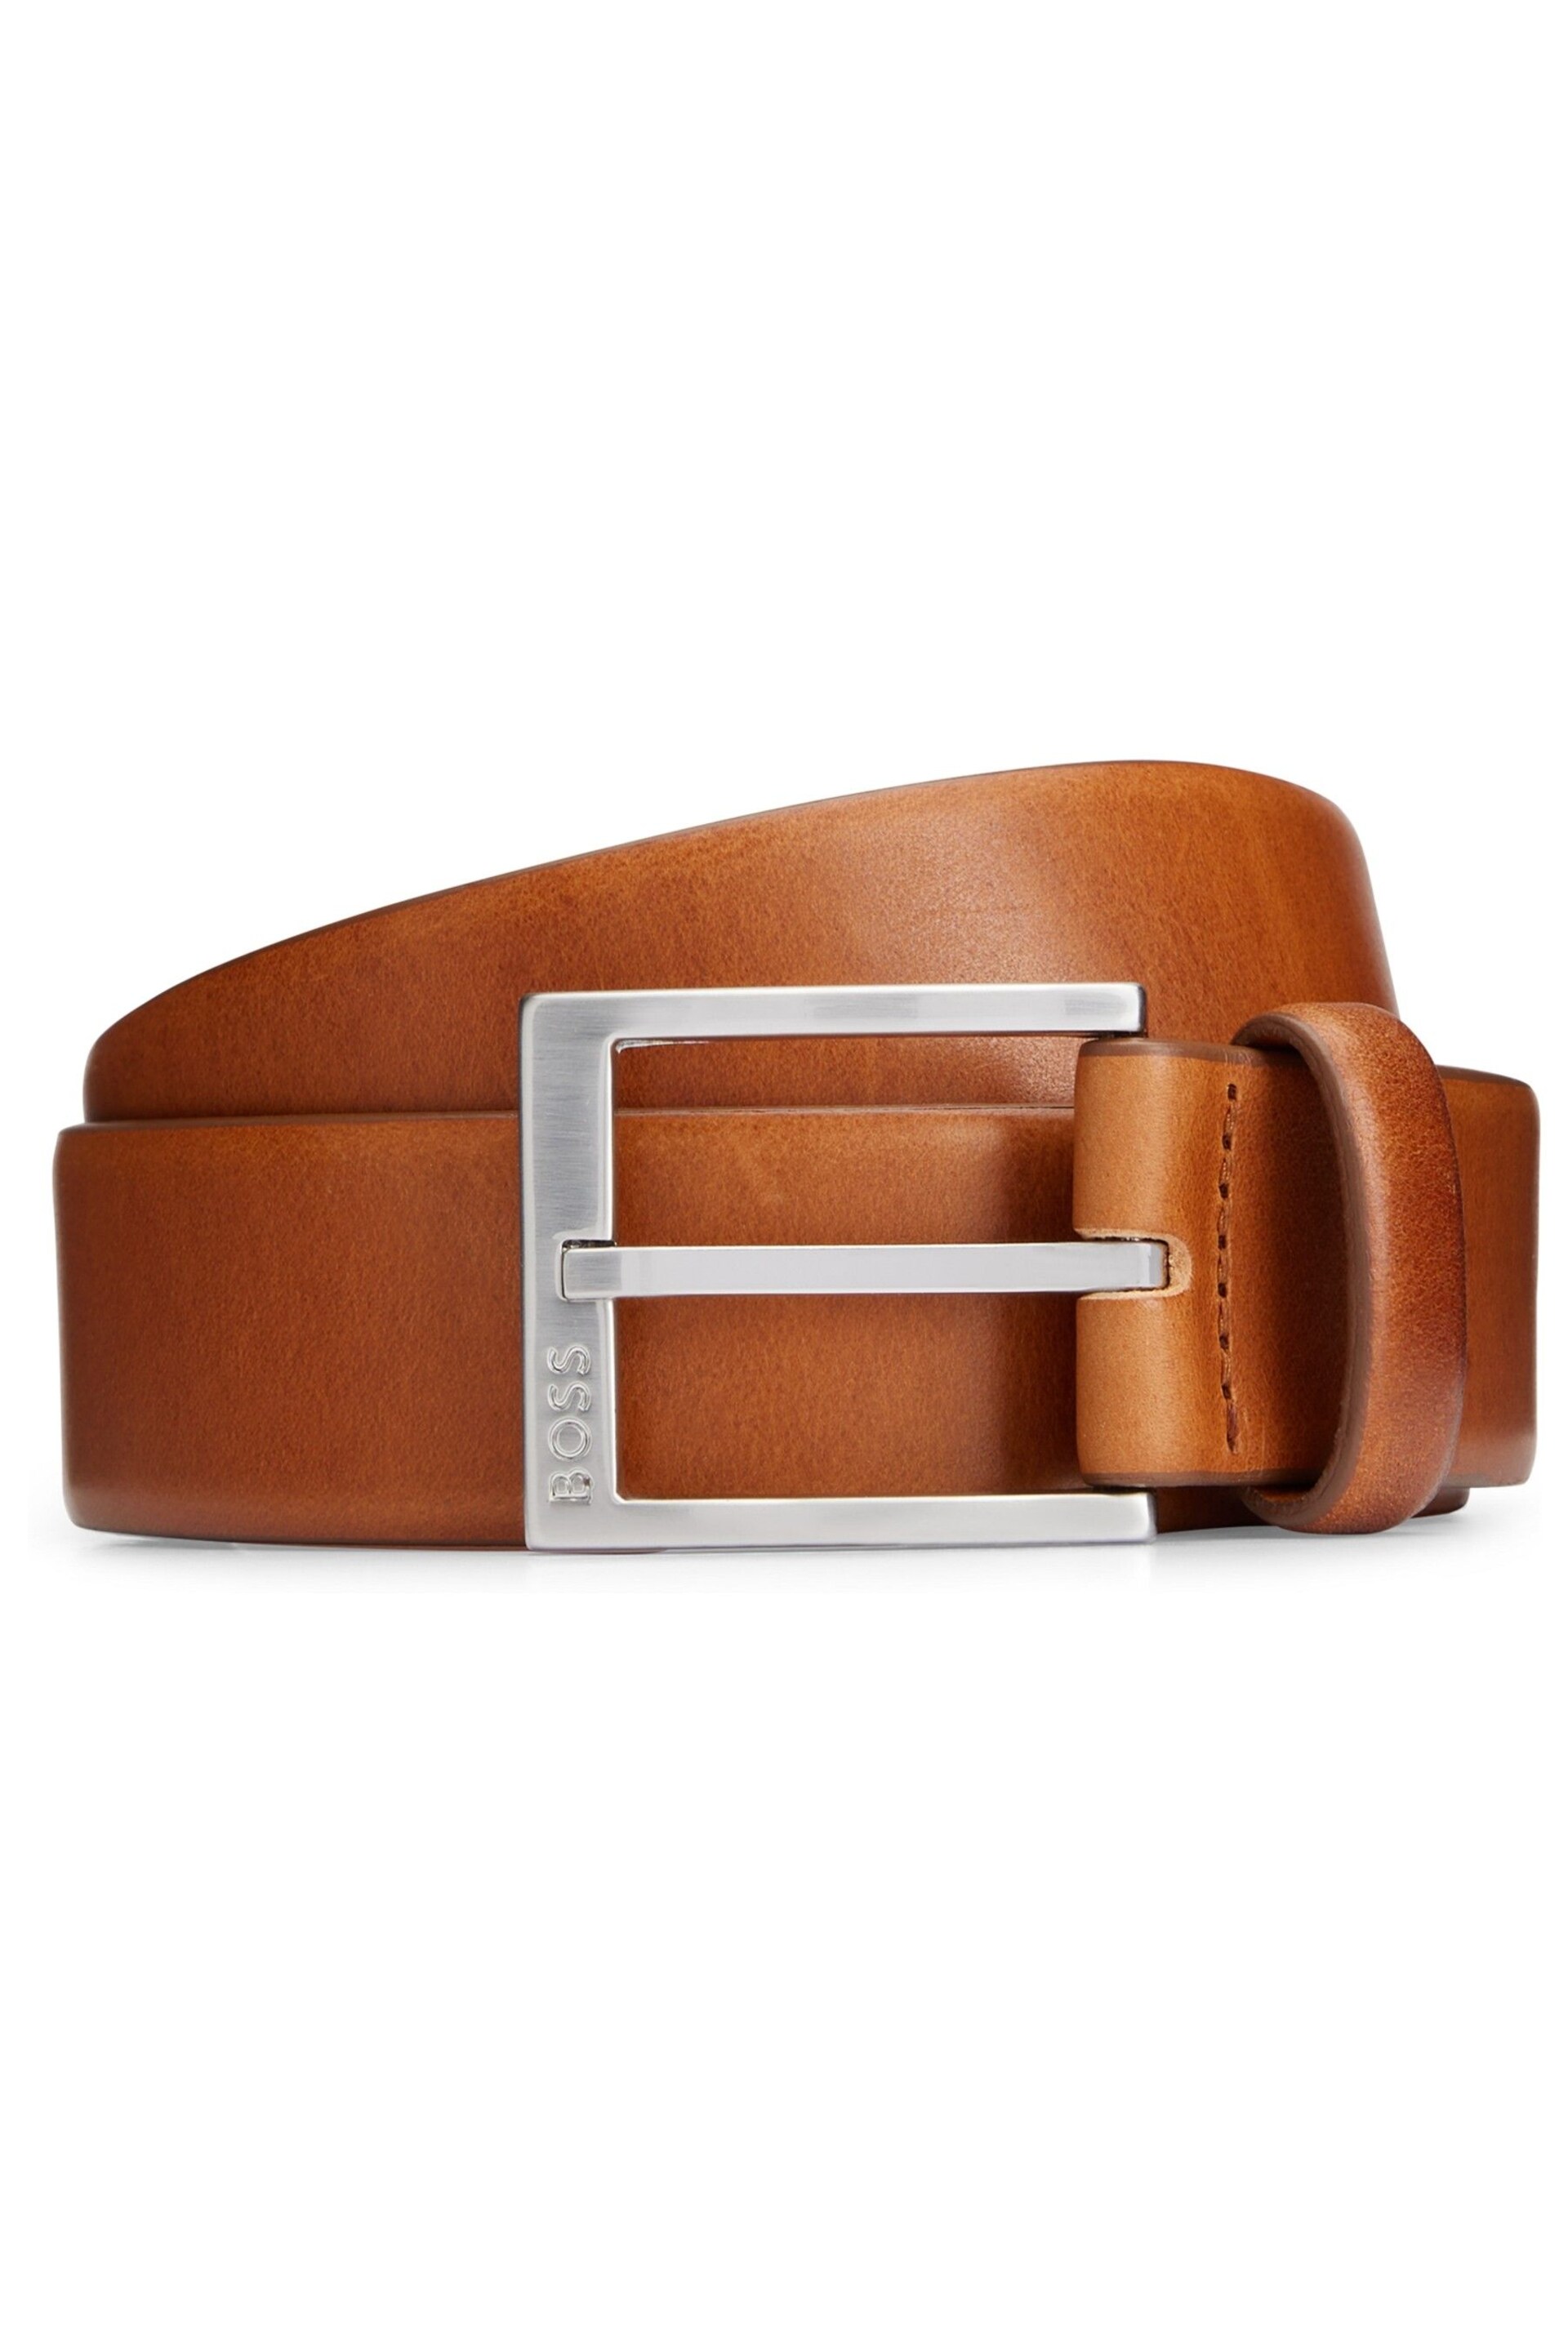 BOSS Brown Squared-Buckle Belt In Italian Leather - Image 1 of 5